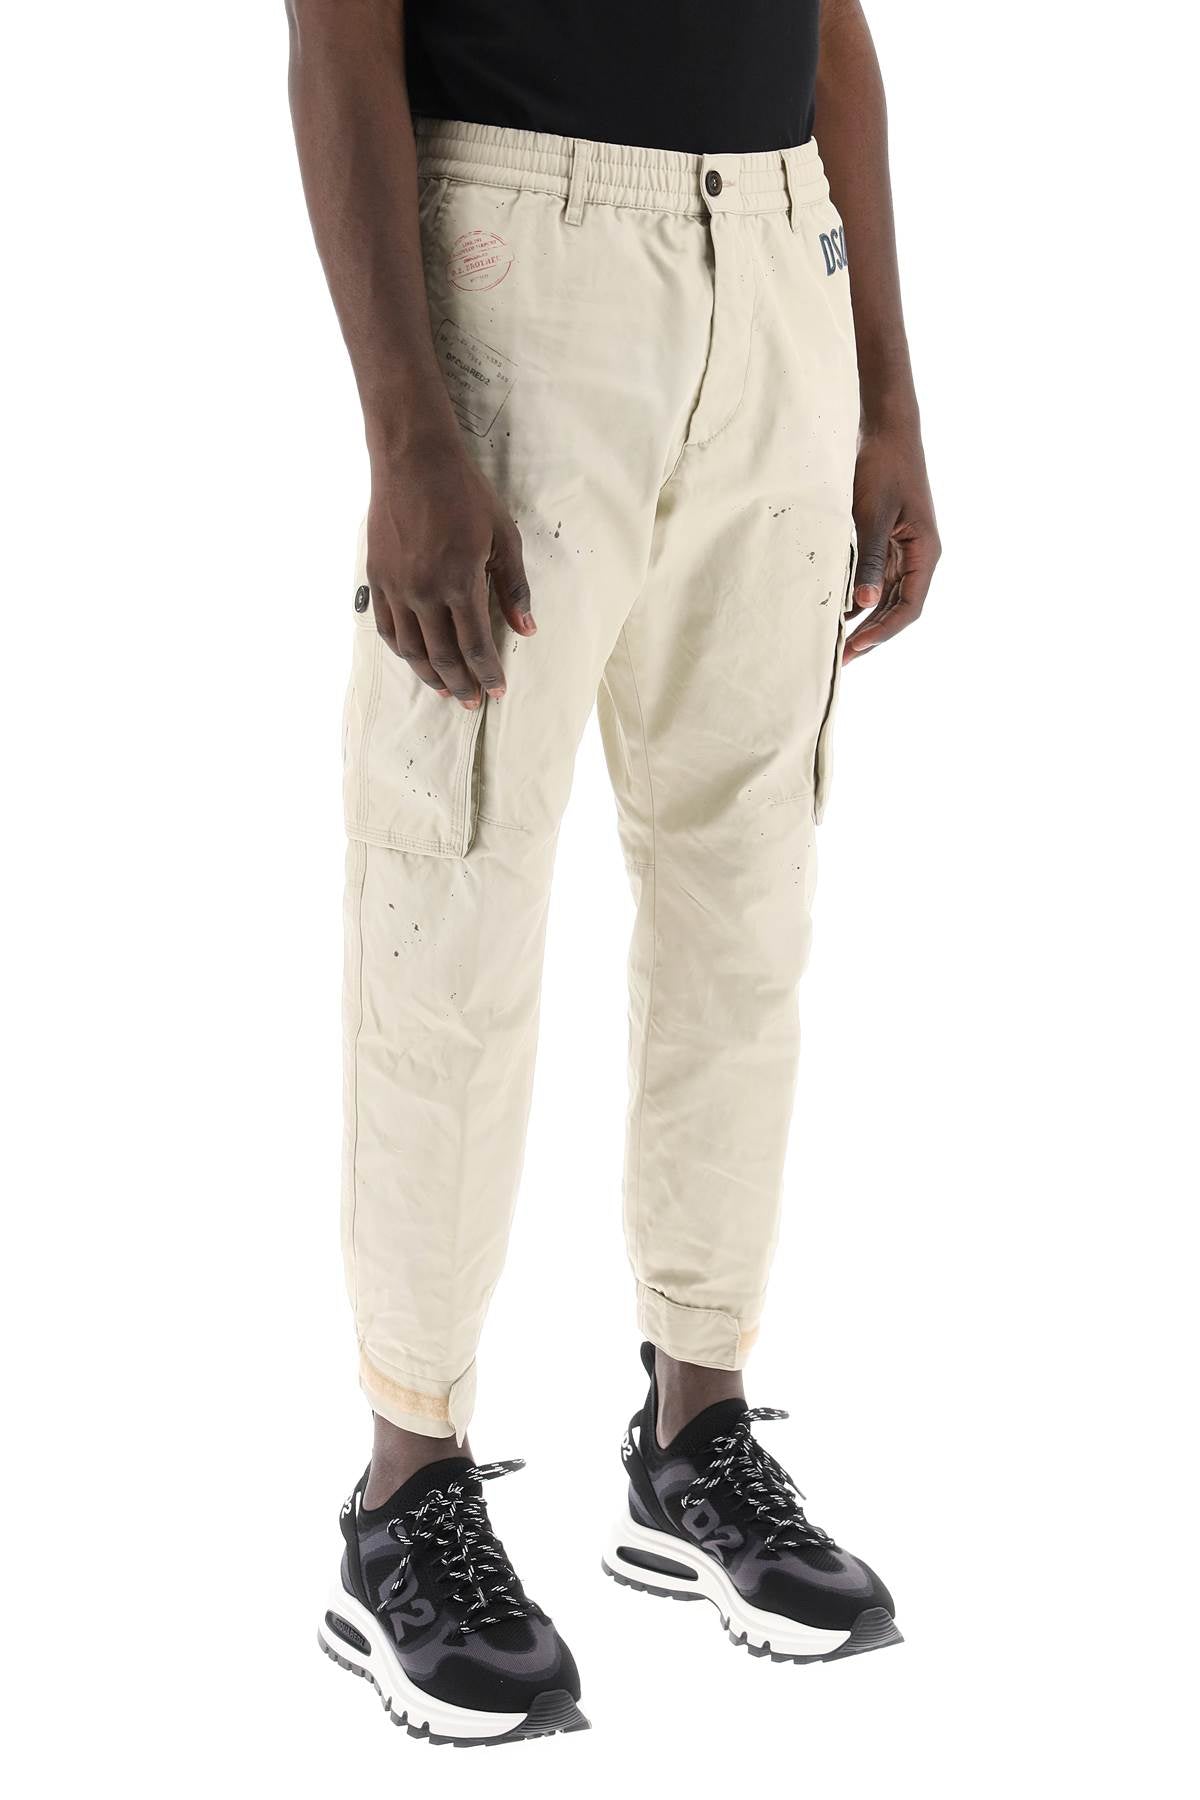 DSQUARED2 Men's SS24 Cargo Pants in Neutral with Logo Patch and Stamp Prints